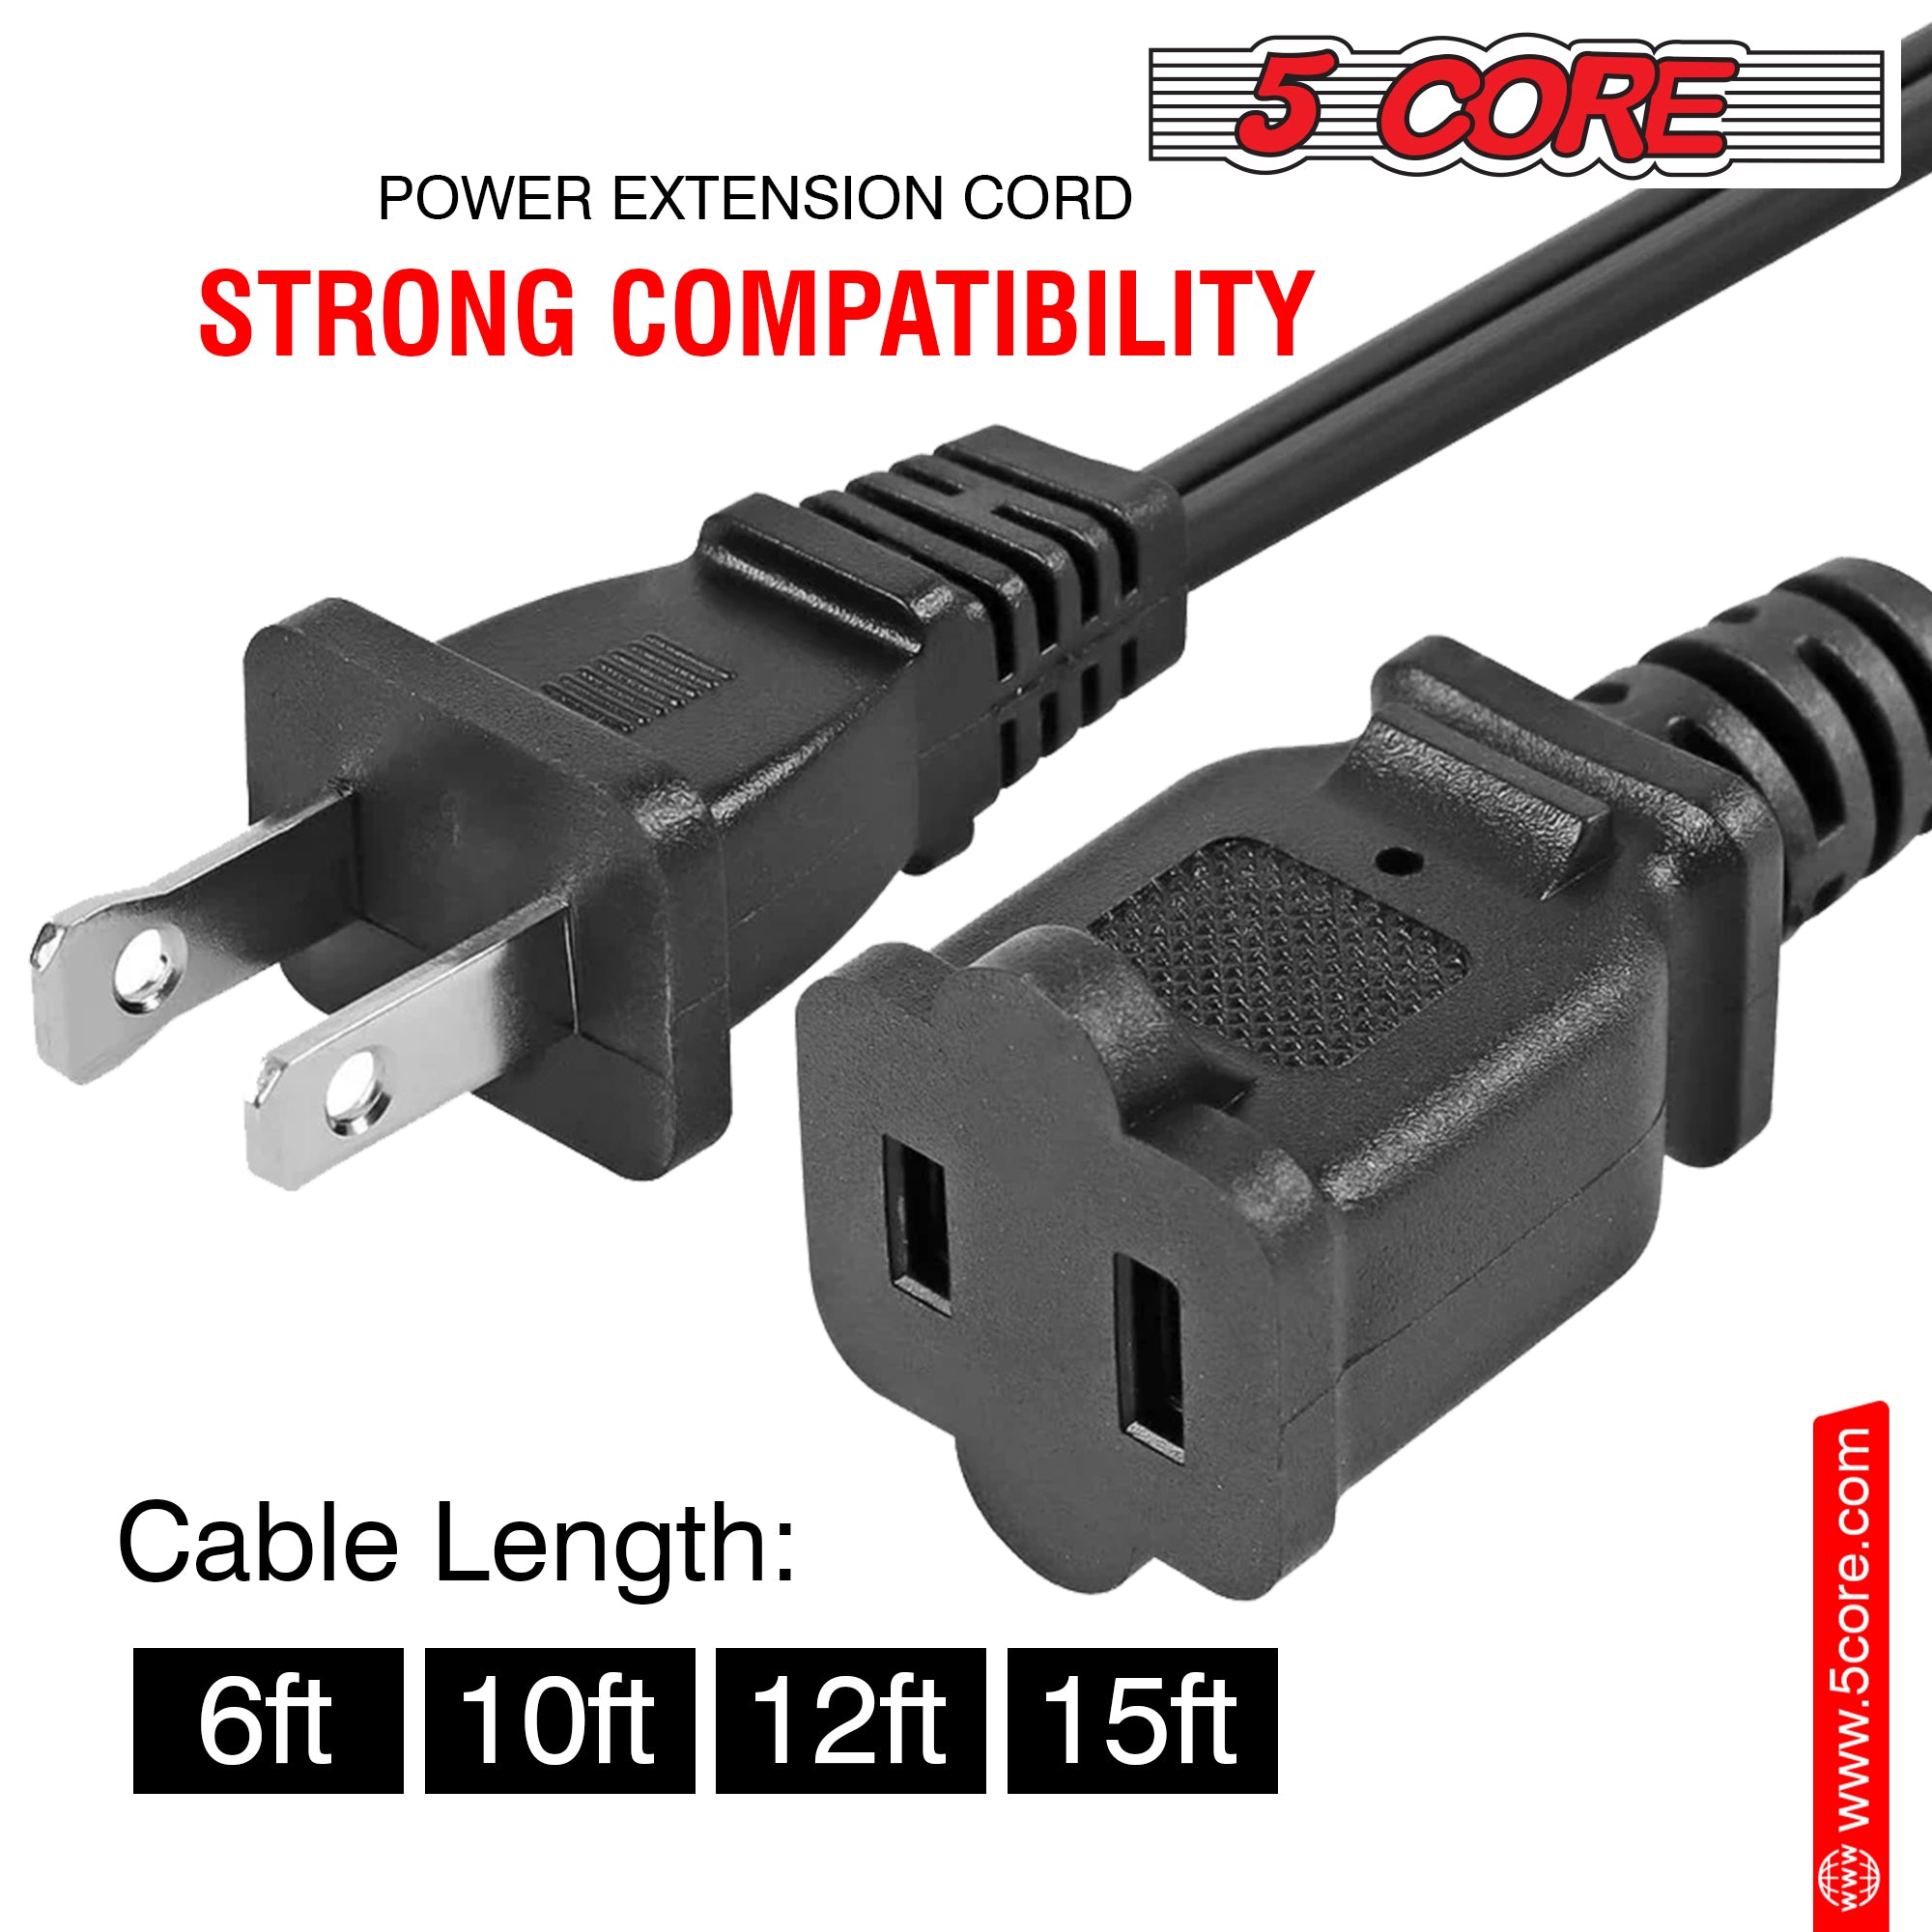 5 Core 2 Prong Extension Cord 10 ft Black Durable Two Prong Extension Cable US AC 2 Prong Christmas Light Extension Cord Outdoor Heavy Duty Plug Extender - EXC BLK 10FT